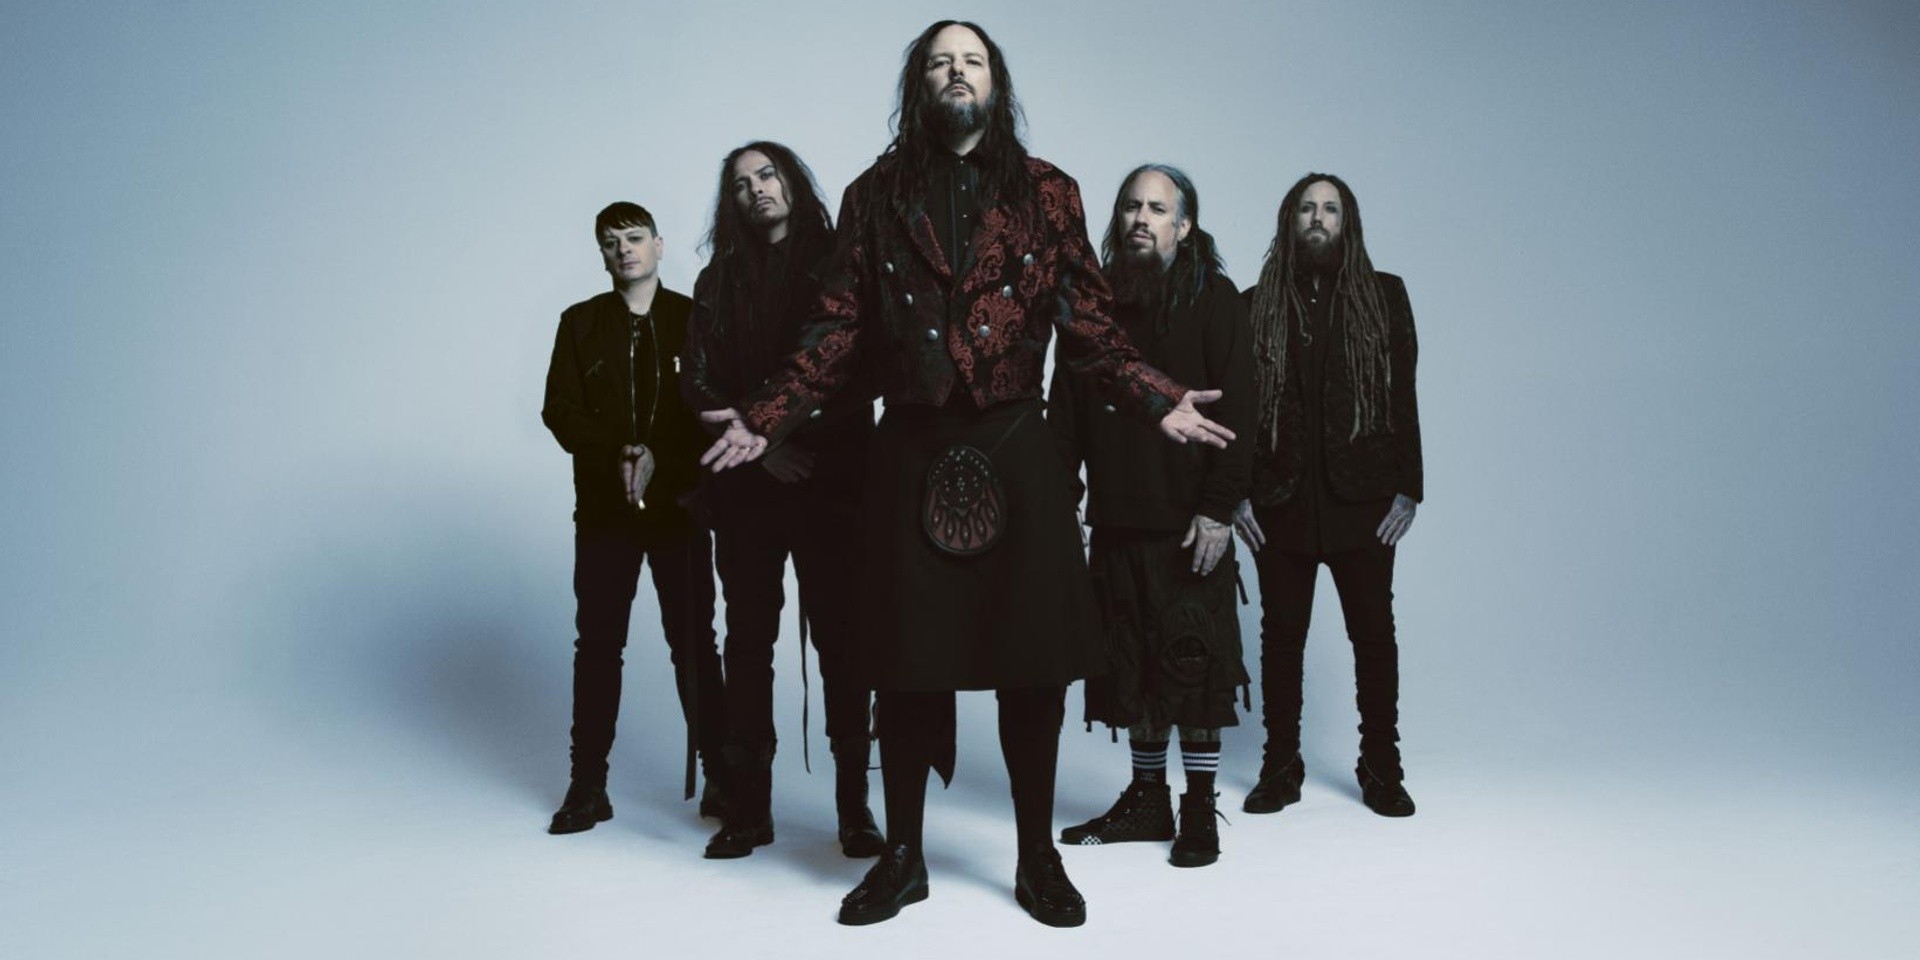 Korn announces new album, releases new single 'You'll Never Find Me' – listen 